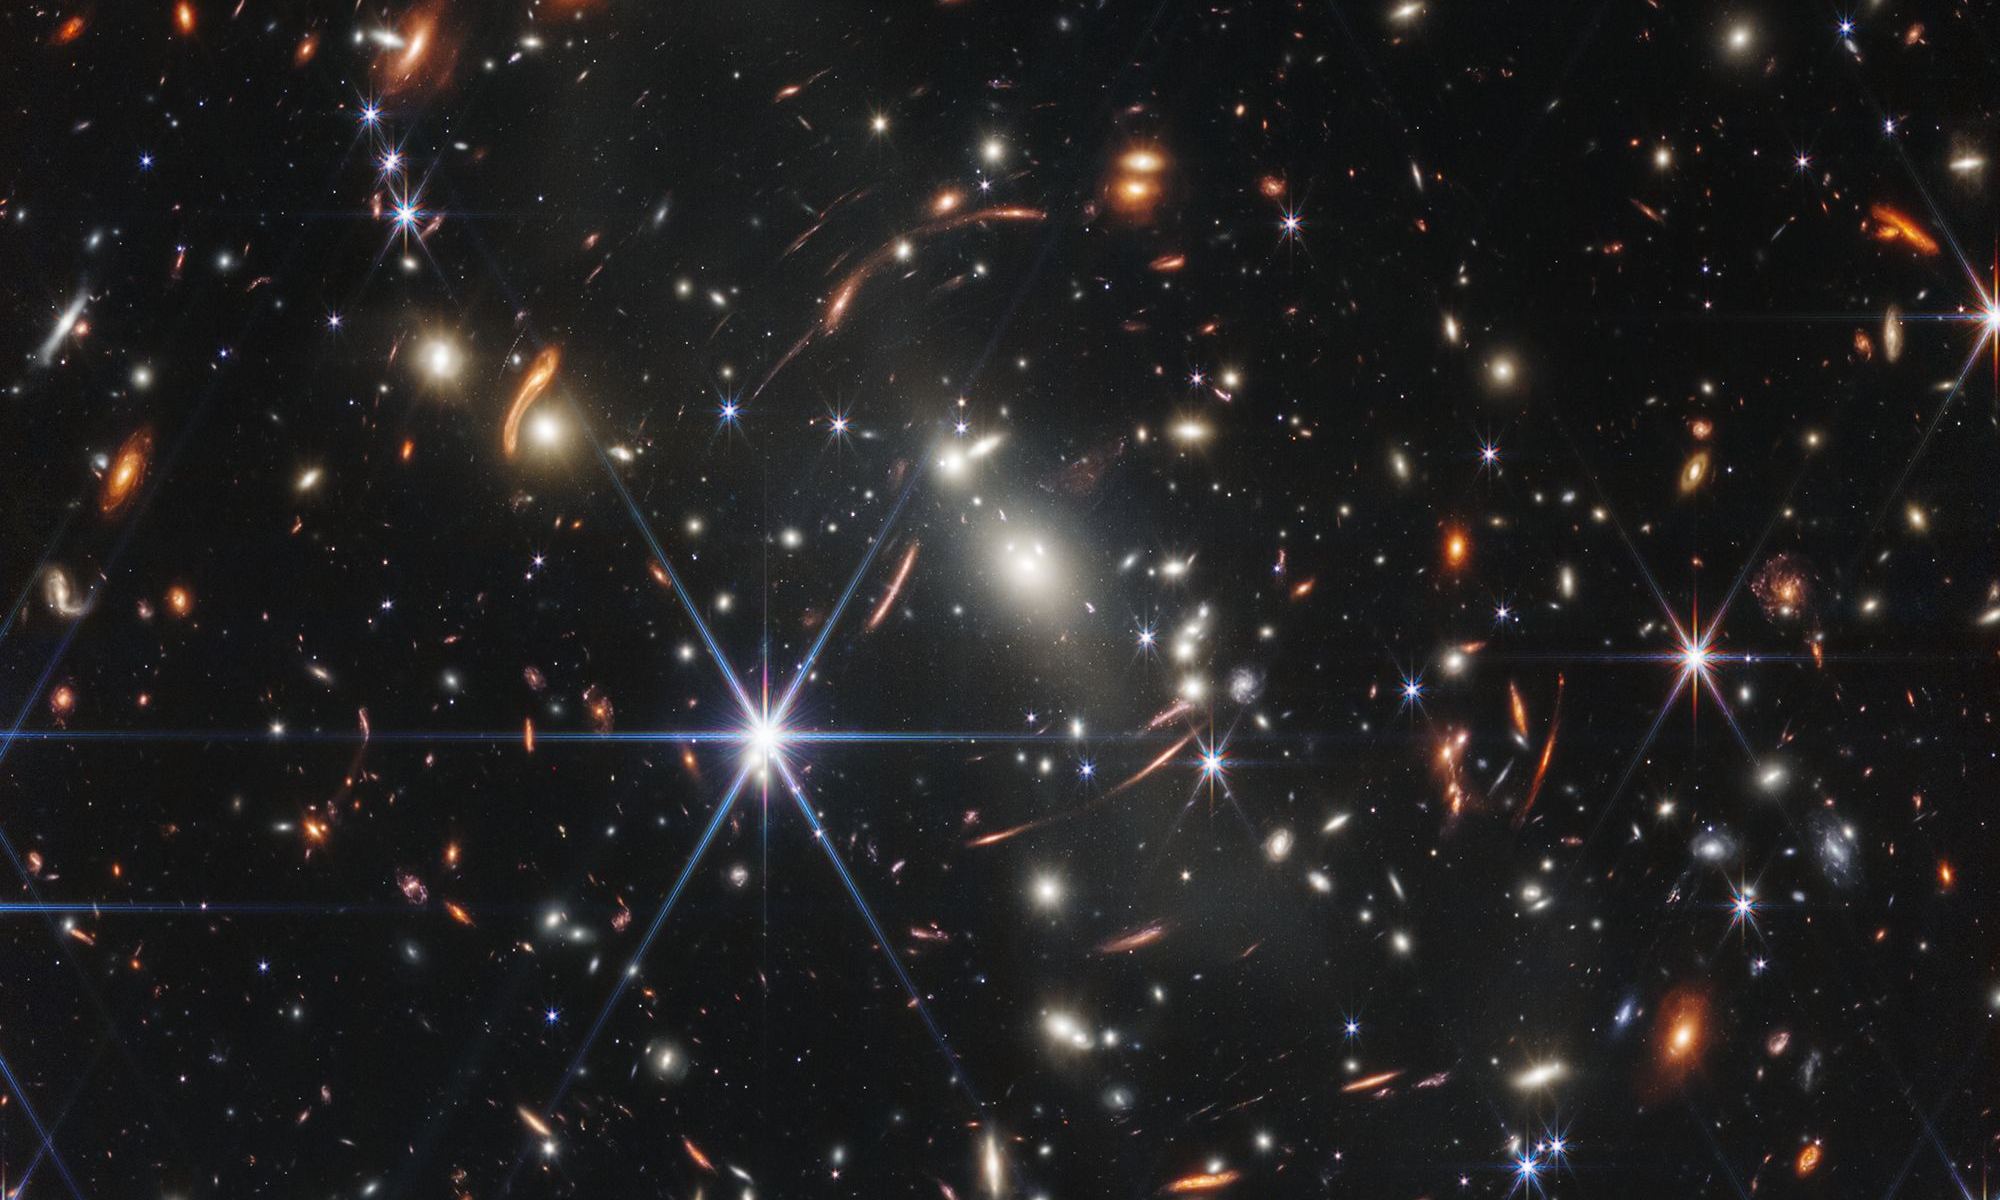 distant galaxies behind a nearby galaxy cluster.